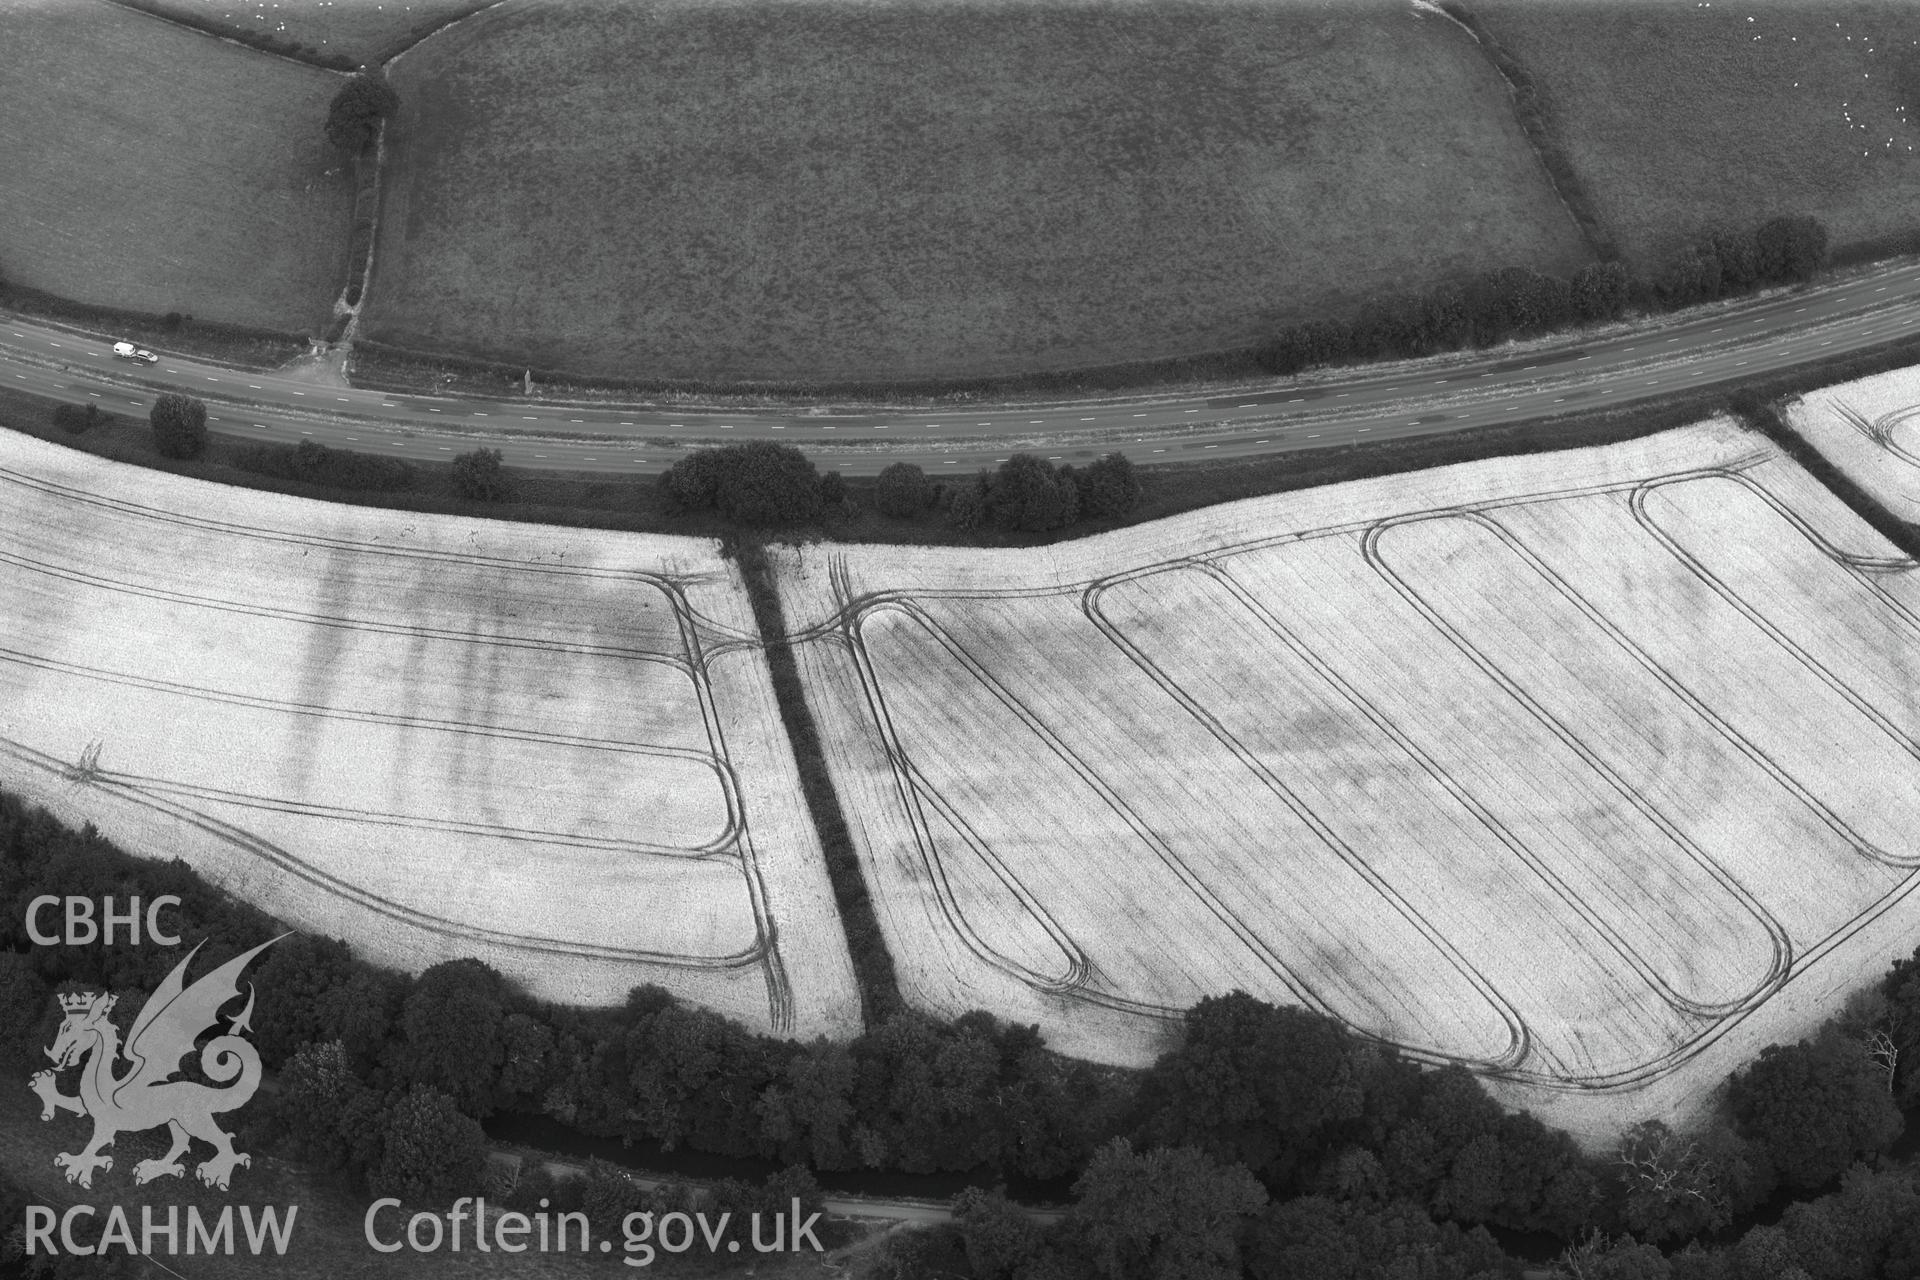 Cefn-brynich Roman fort, detailed view (black and white) of cropmarks of Roman fort from south, taken by RCAHMW 1st August 2013.